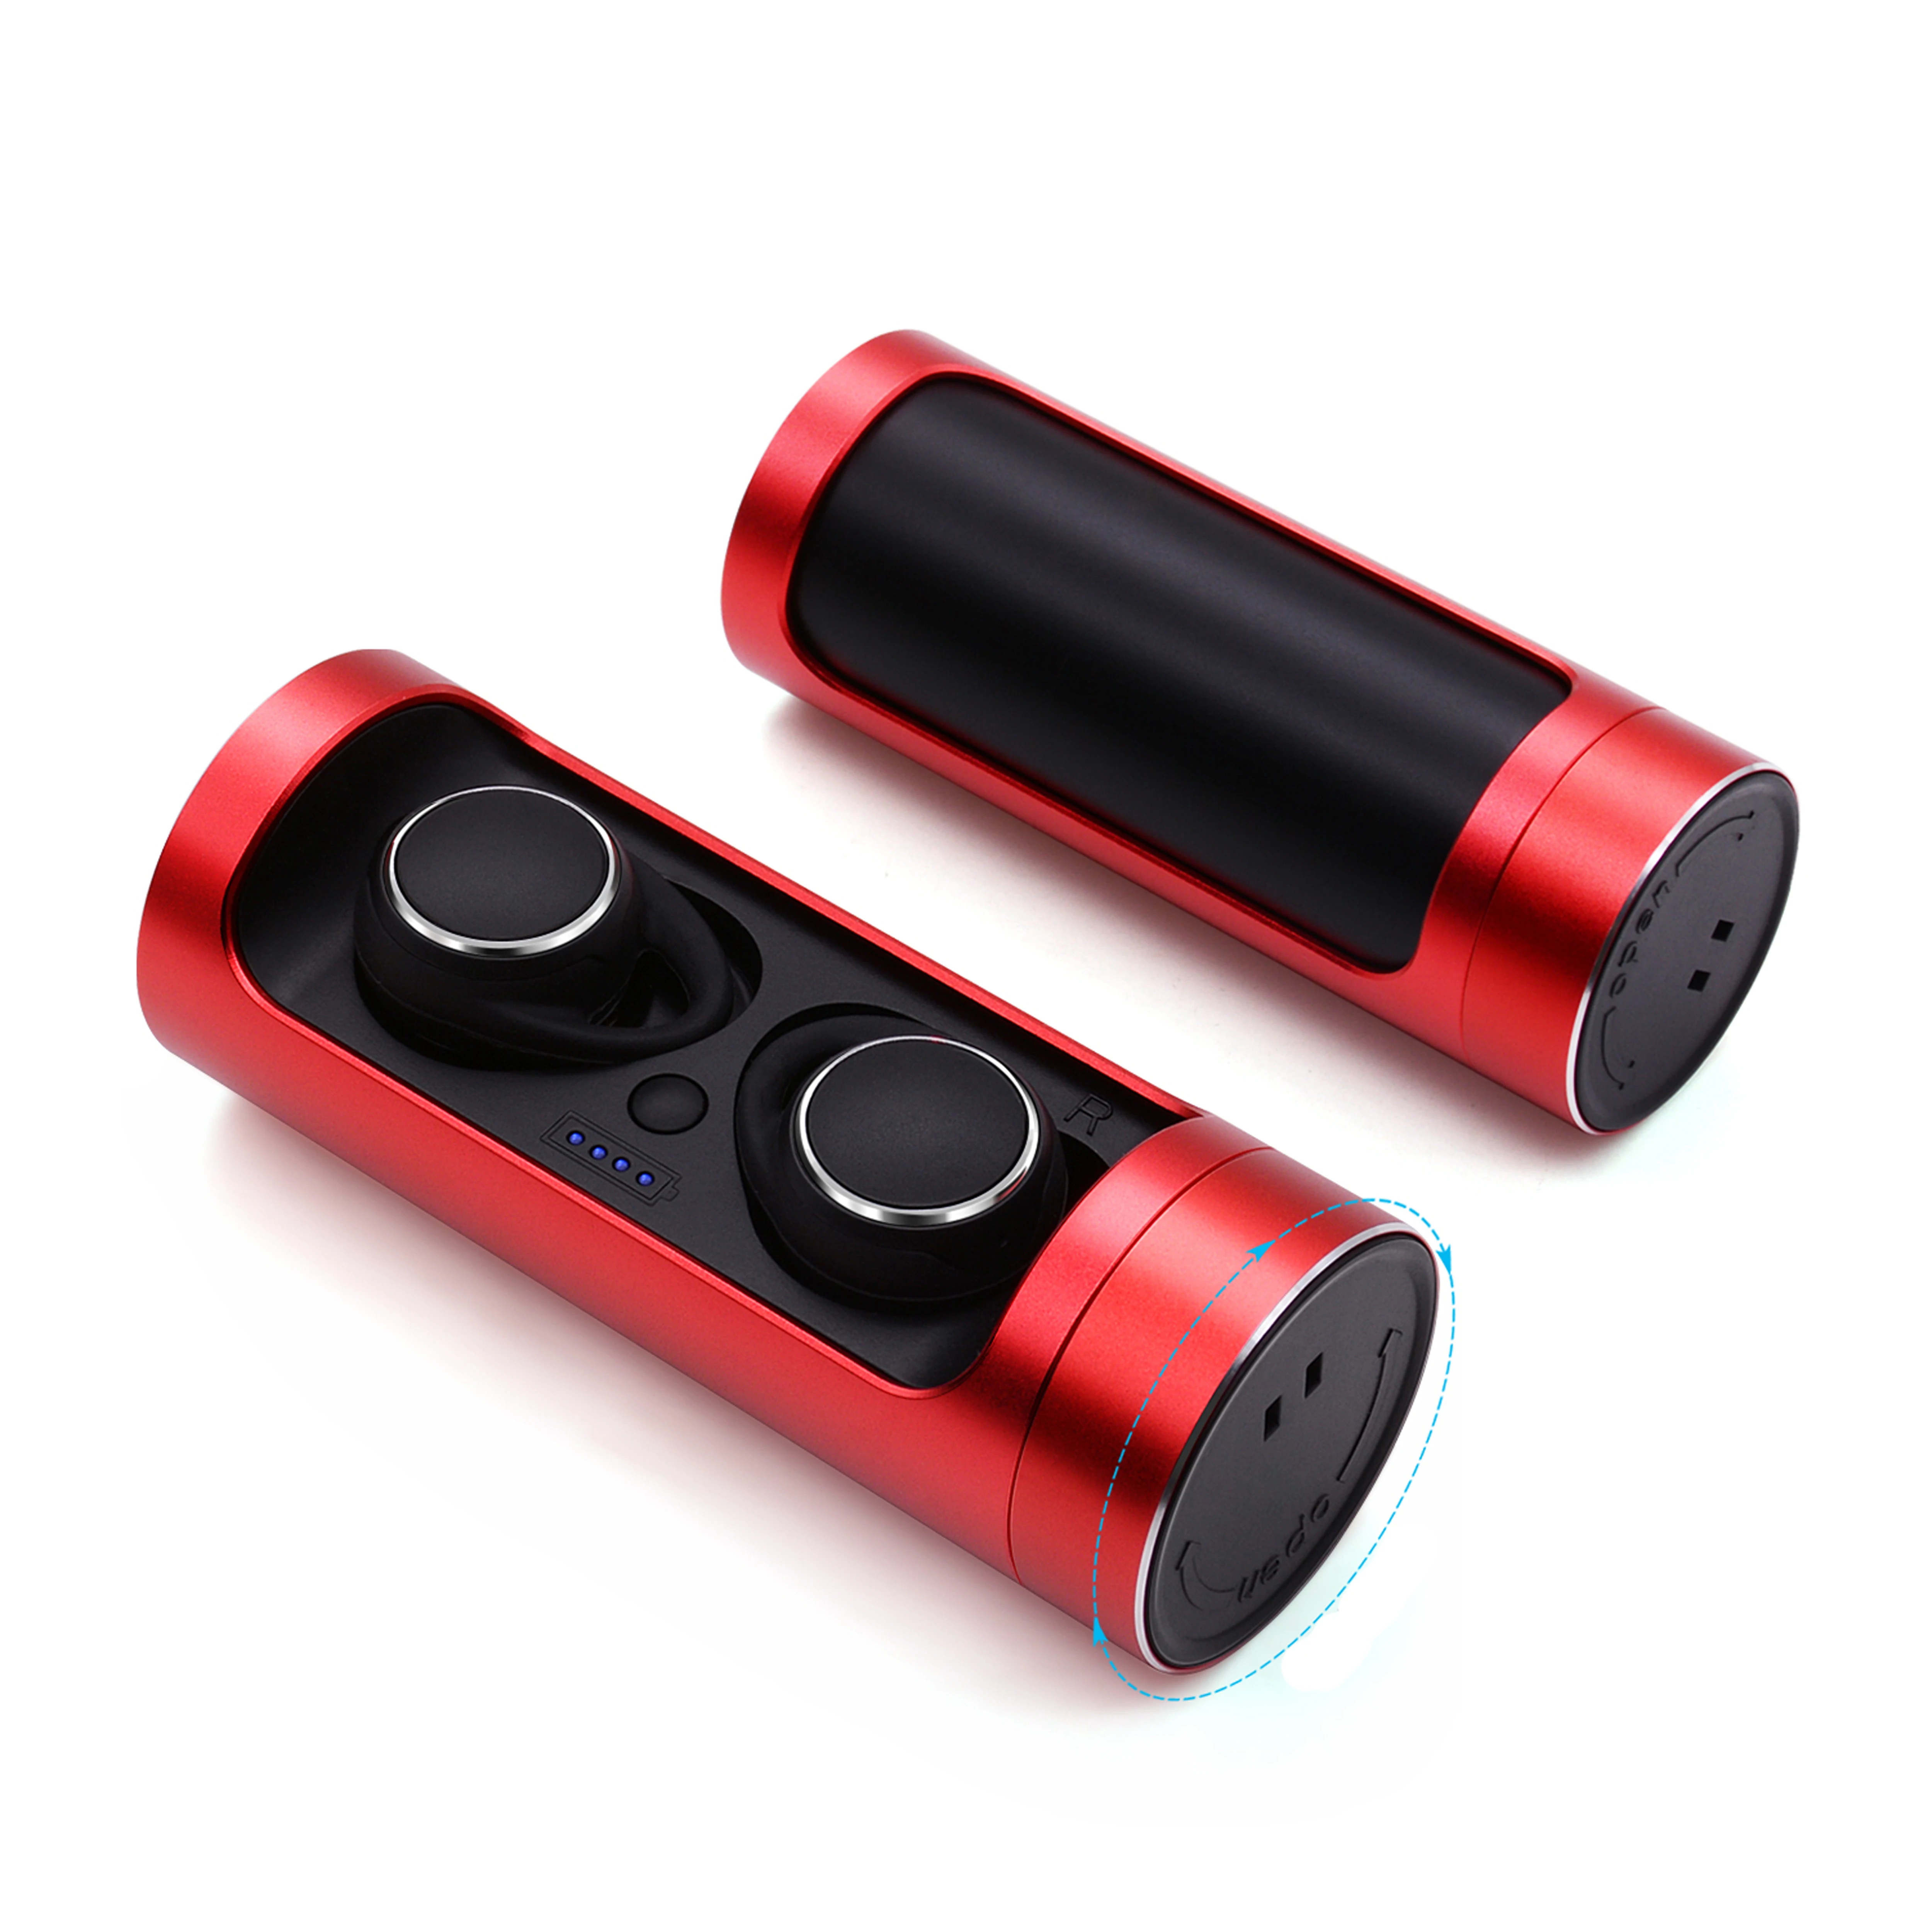 

Hot Sale high quality 5.0 TWS true wireless earphone waterproof mini earbuds with rotation charger case, Black;white;red